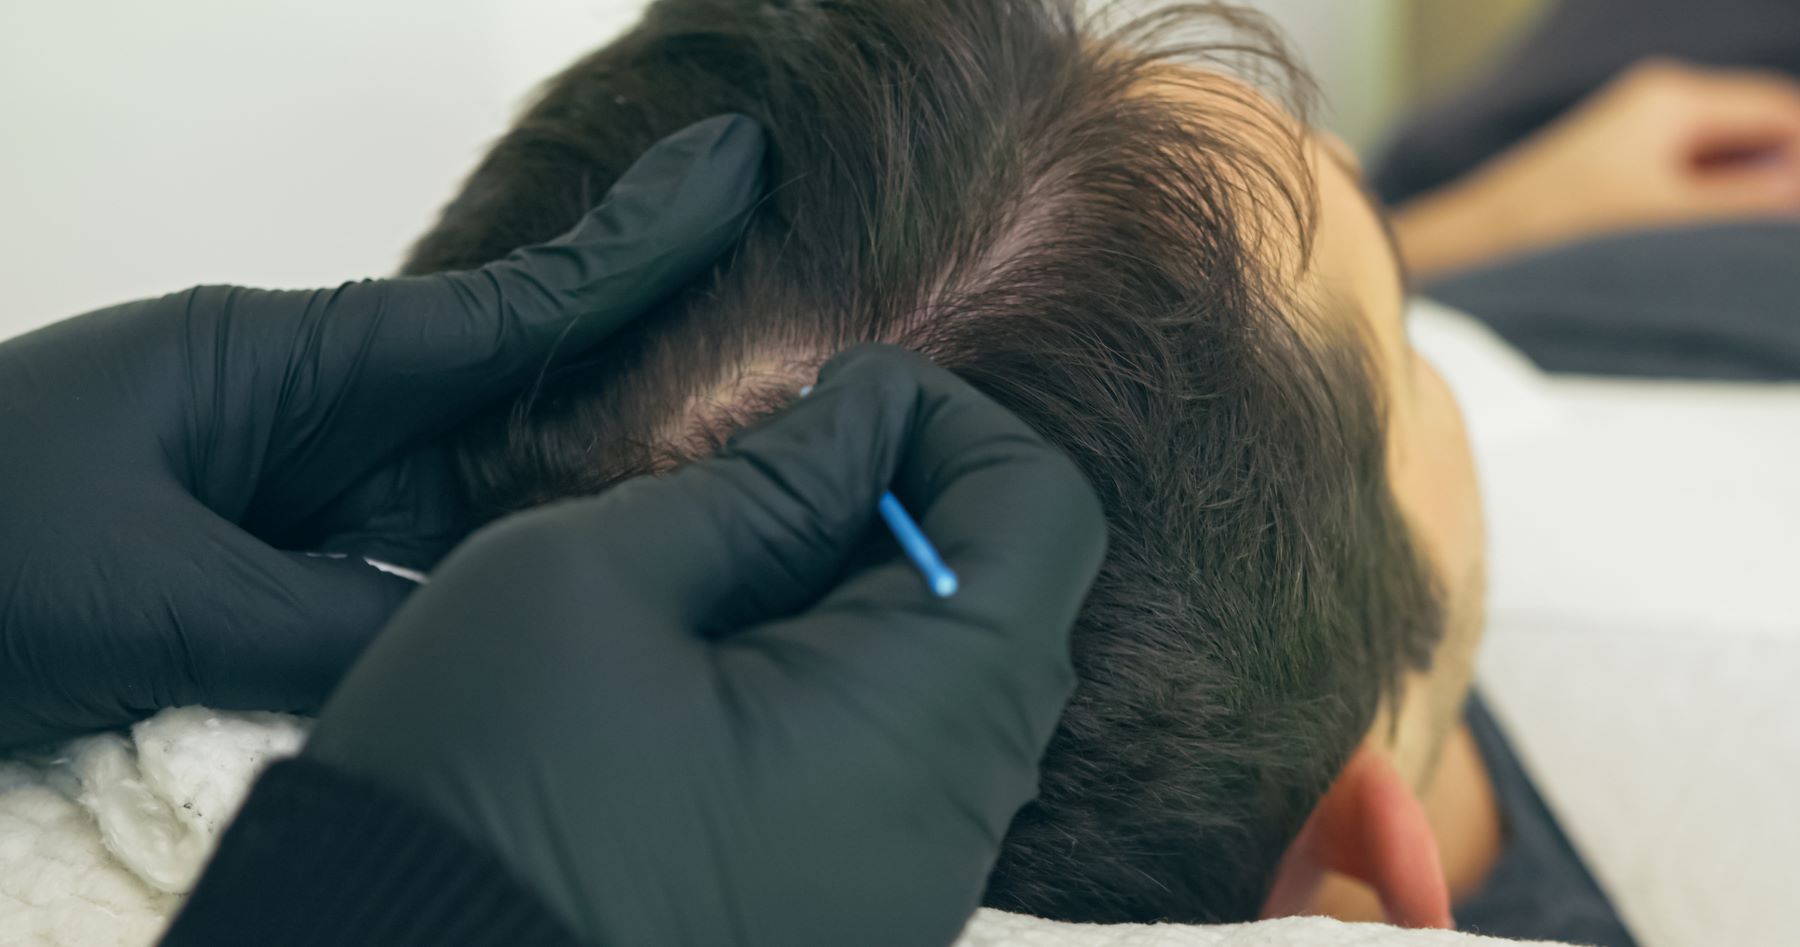 Male hair tattoo combined with hair transplant